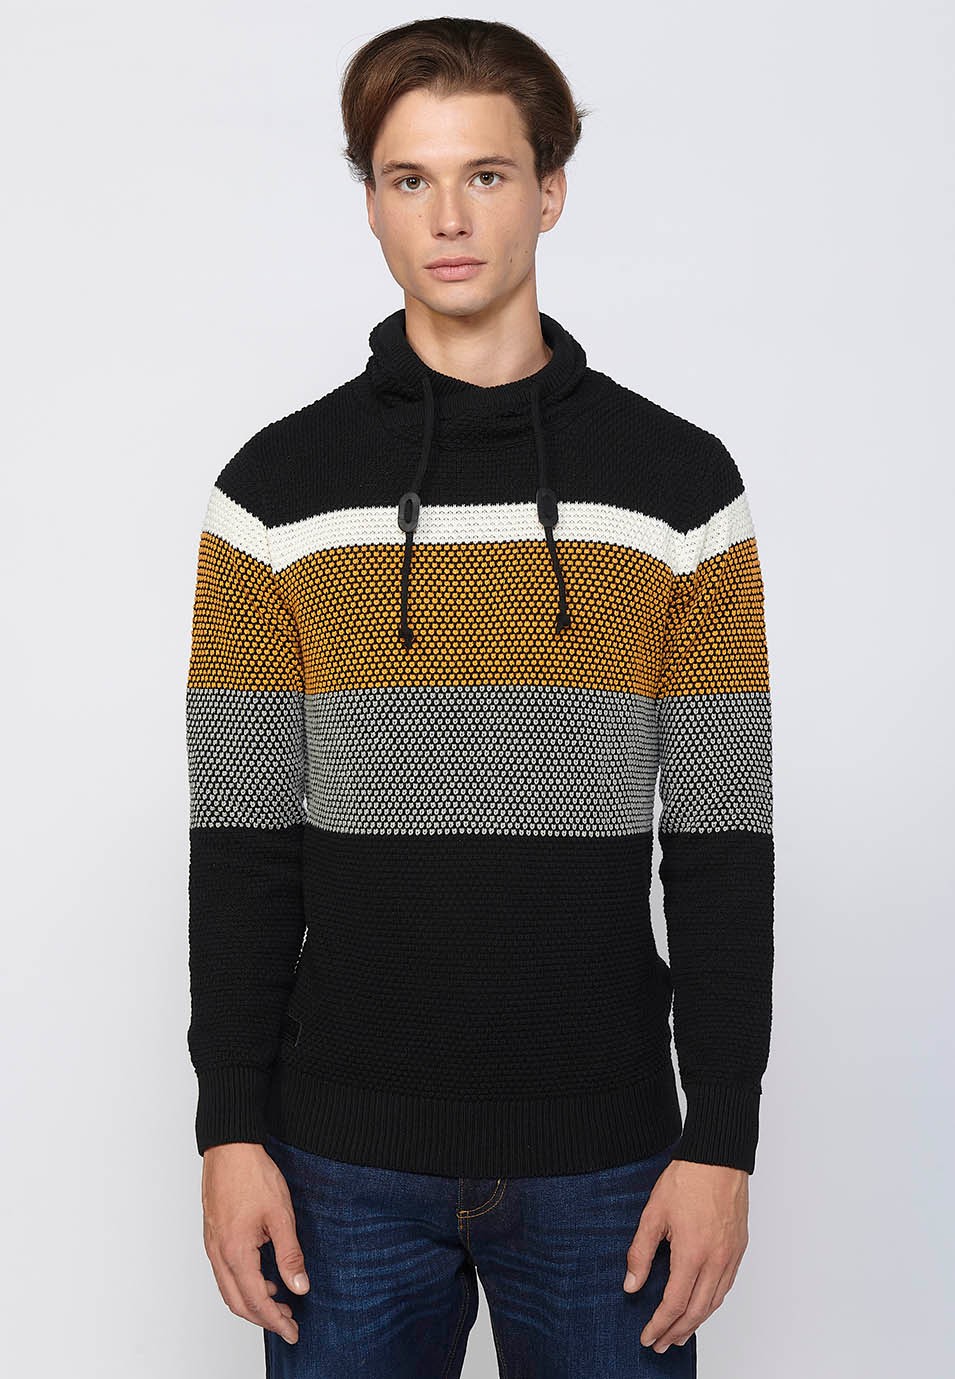 Men's Black Cotton Textured Striped Tricot Long Sleeve Pullover with Adjustable Drawstring Turtleneck